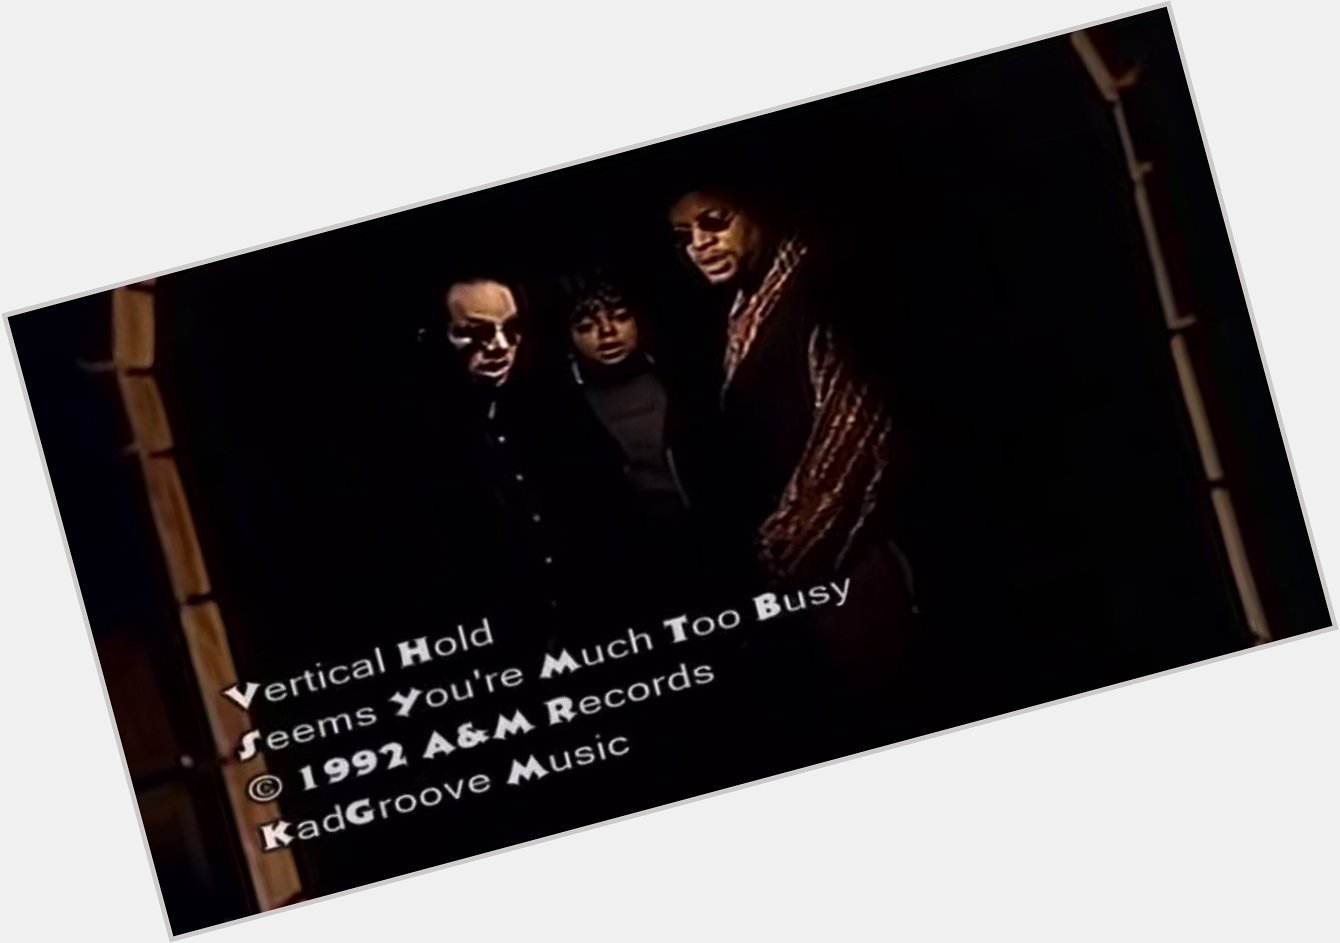 Happy Birthday
Angie Stone.

Seems You re Much Too Busy x Vertical Hold (1992) 